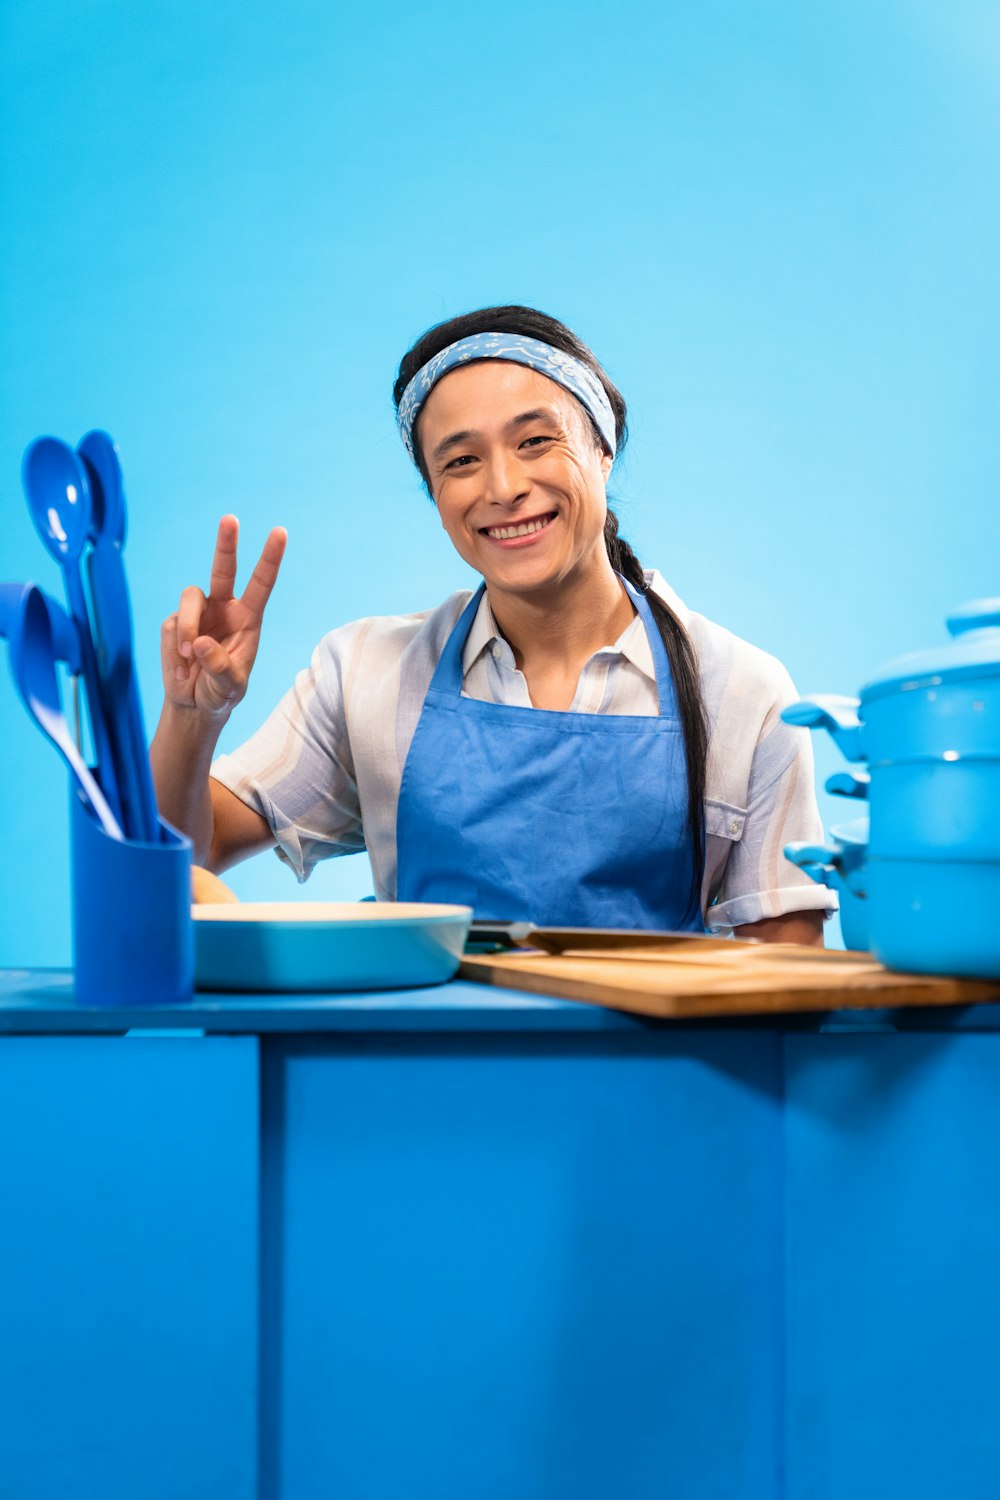 a woman in an apron making a peace sign